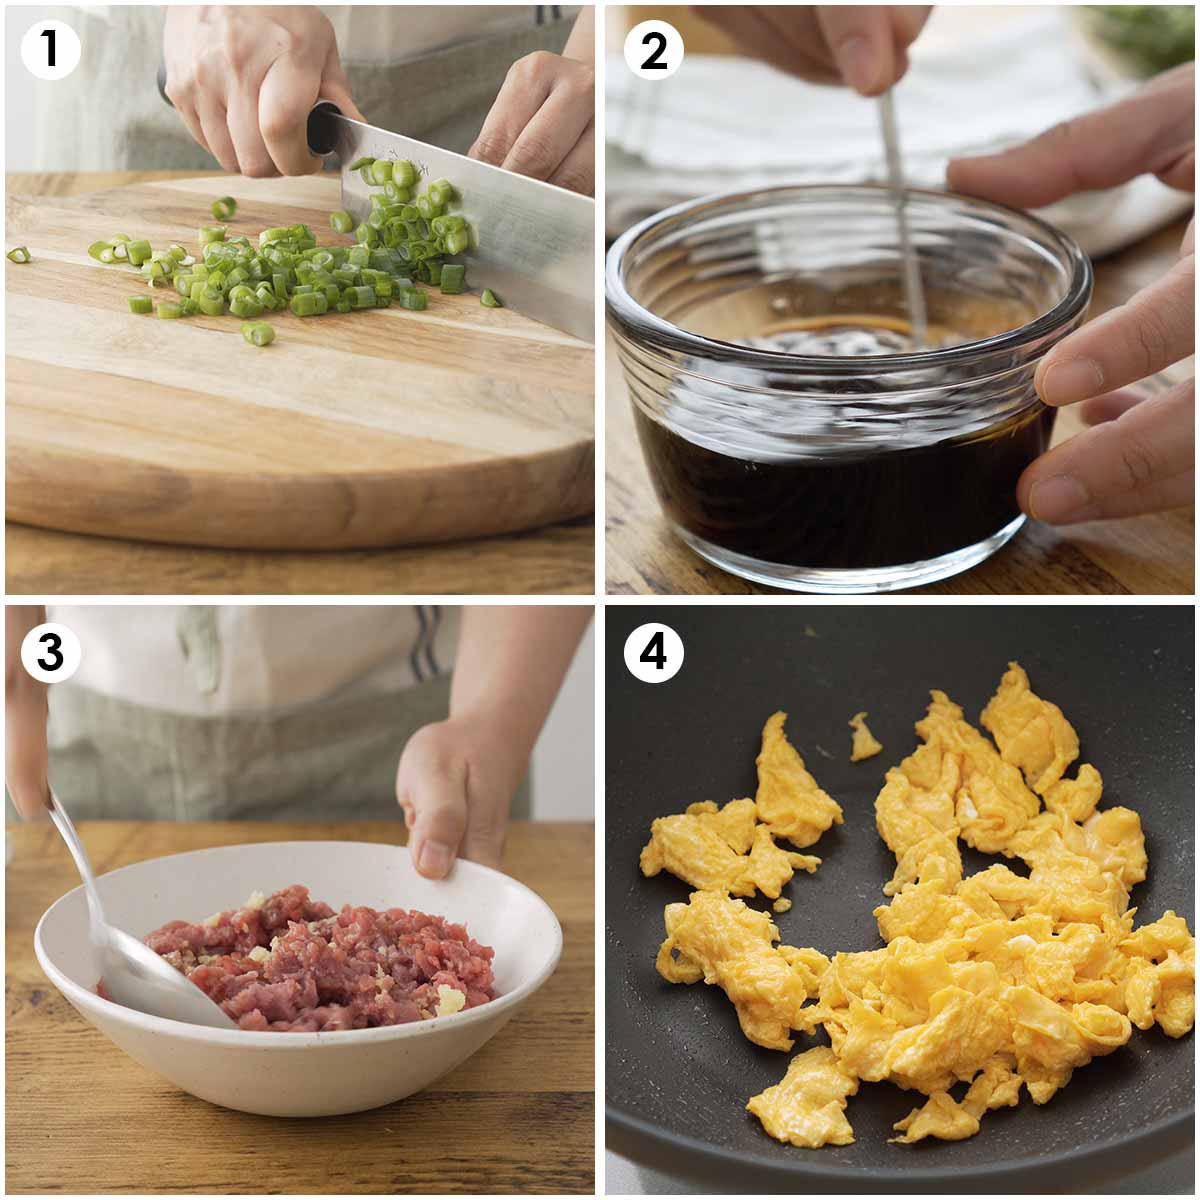 4 image collage showing how to prepare vegetables, stir fry sauce, beef marinade and fried egg.